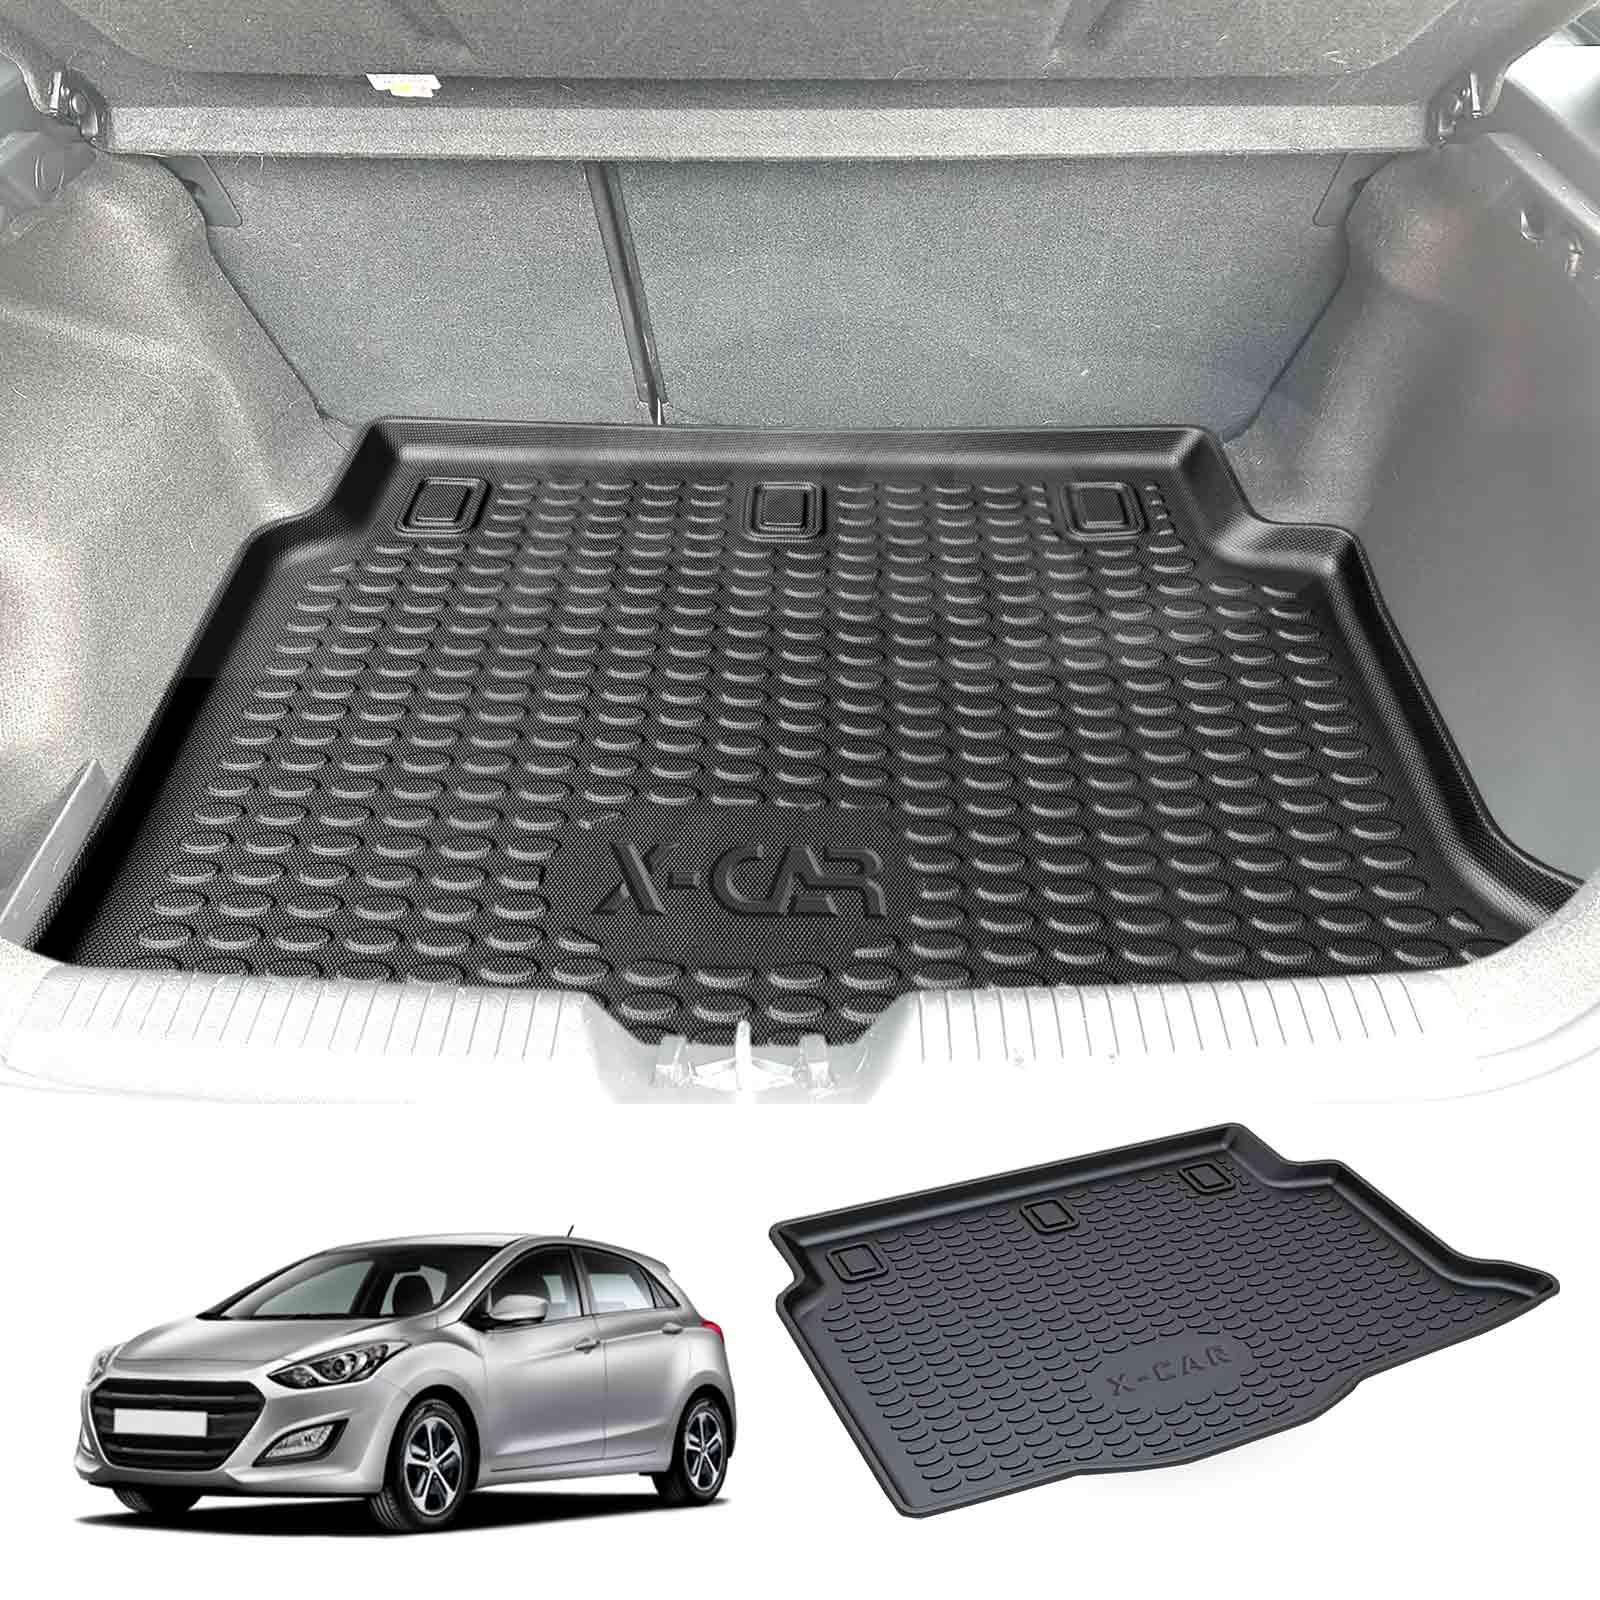 3D Moulded Heavy Duty Waterproof Cargo Mat Boot Liner Luggage Tray Fit Hyundai i30 Hatchback 2012 2013 2014 2015 2016 2017